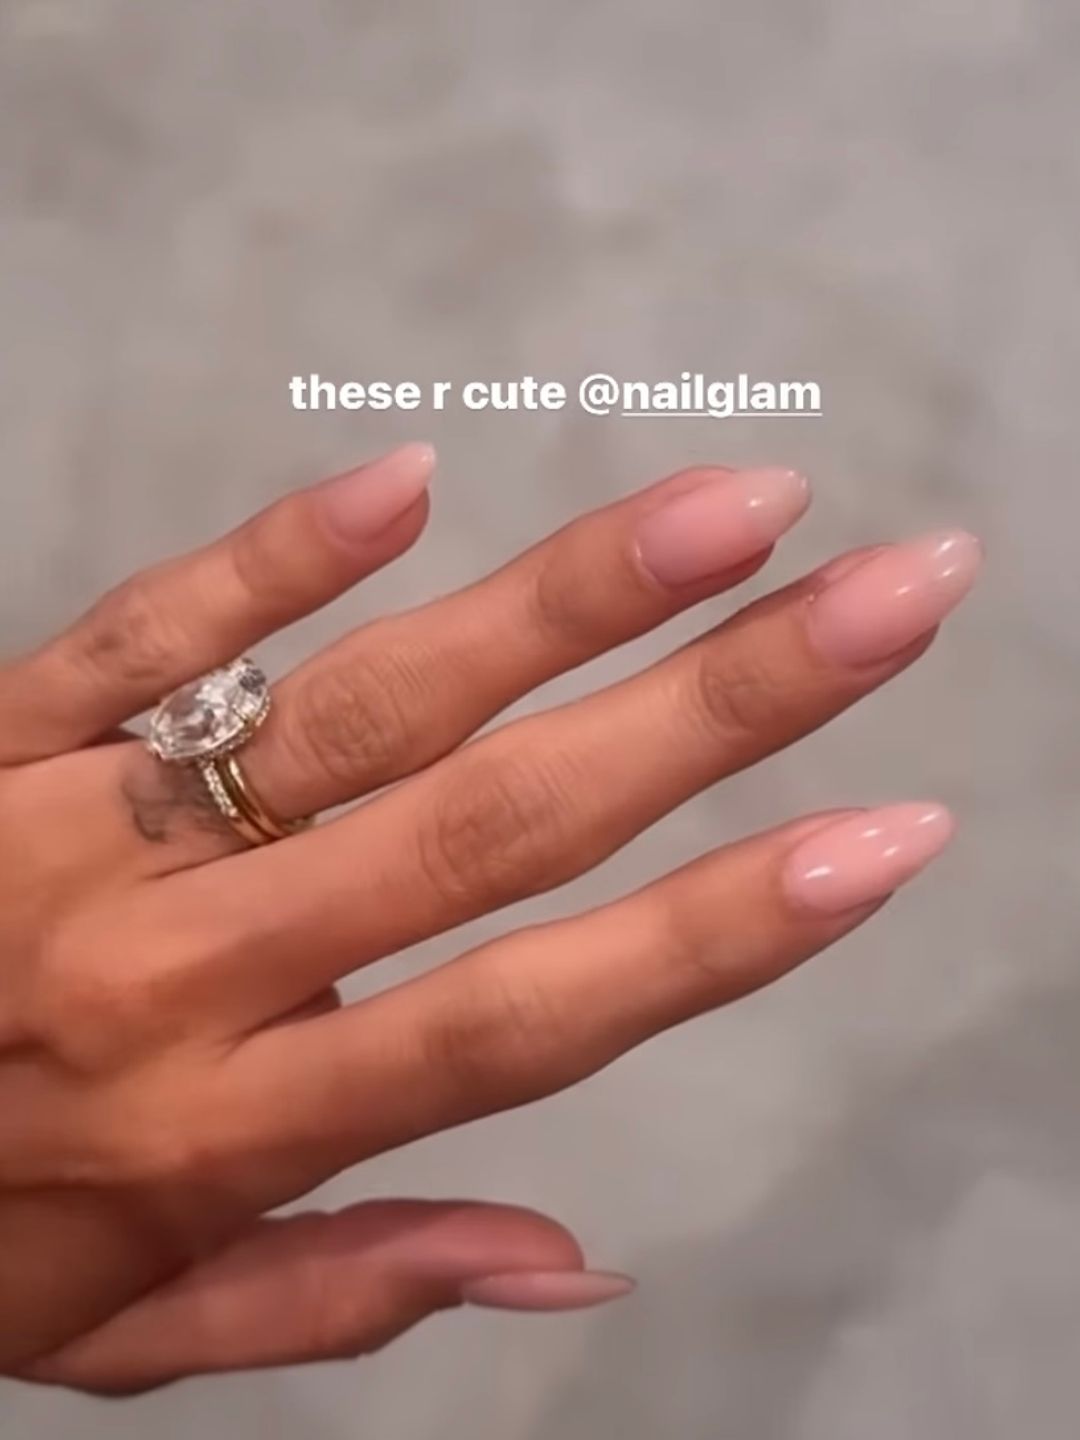 Hailey showed off her pastel pink nails on her Instagram Stories 